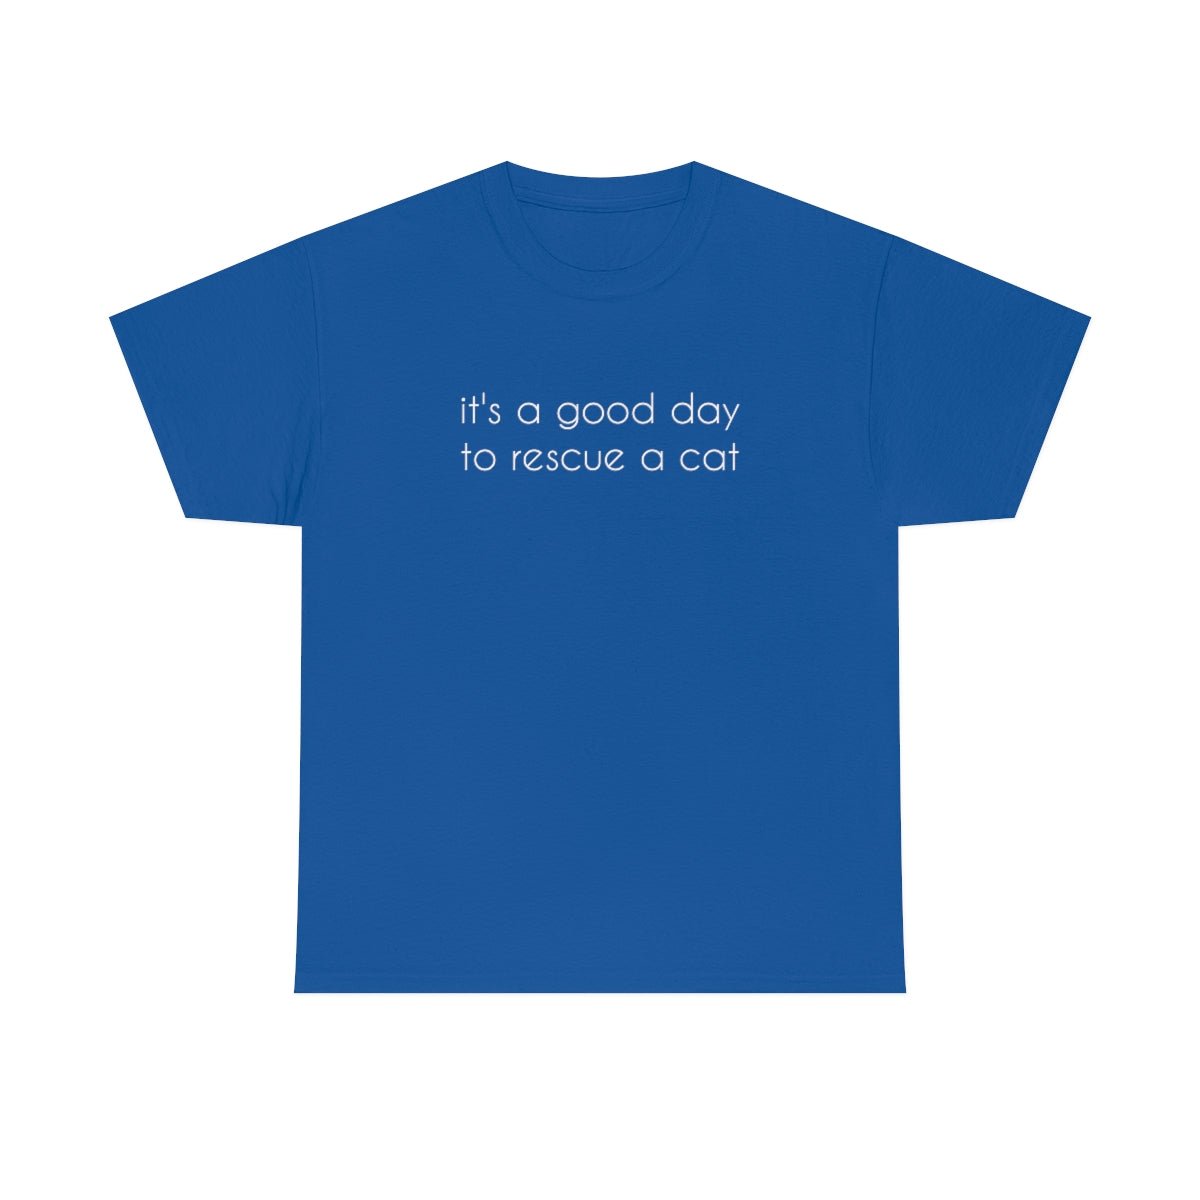 It's A Good Day To Rescue A Cat | Text Tees - Detezi Designs-10385958213705453258